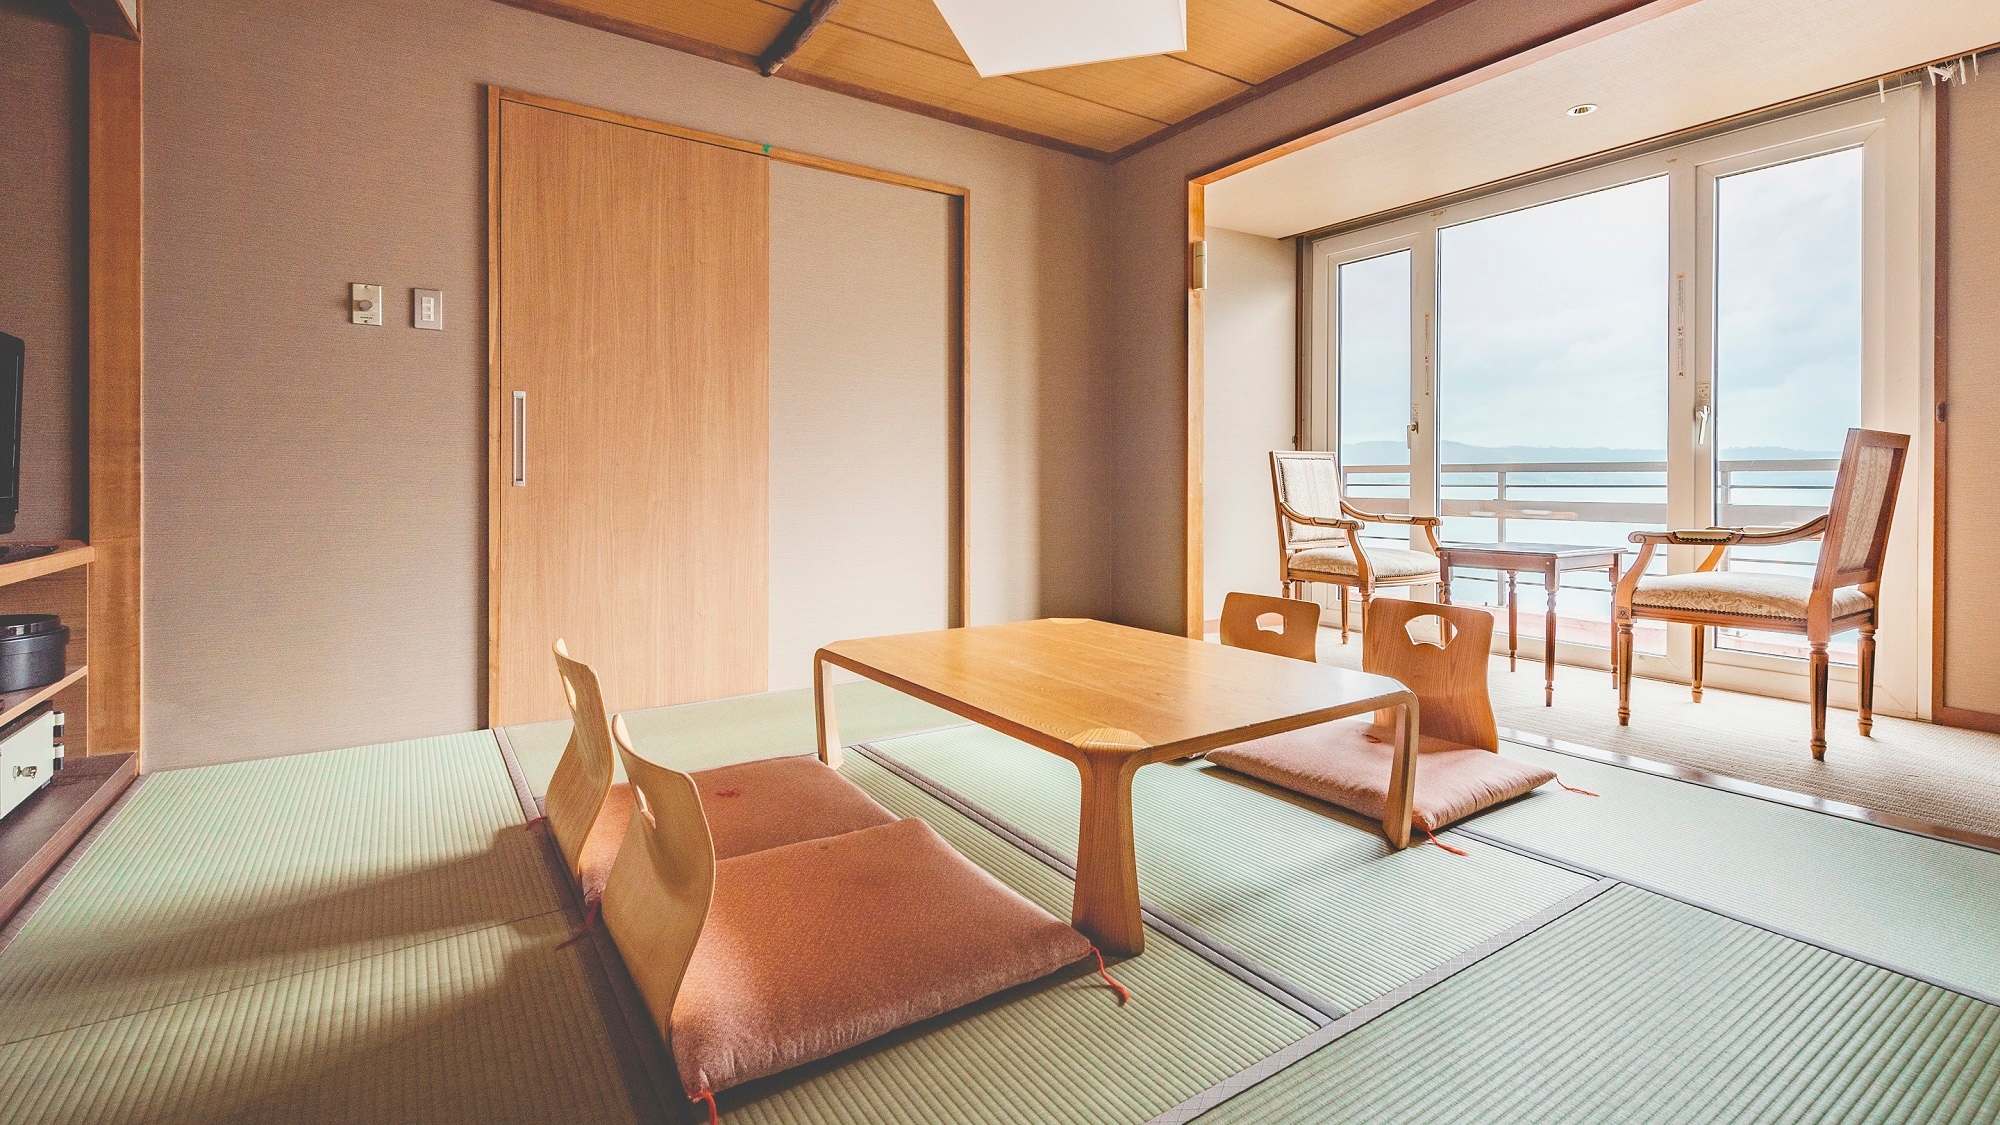 [East Building, Japanese-style room 8 tatami mats] A classic Japanese-style room at a hot spring inn. It can be used by 4 people.